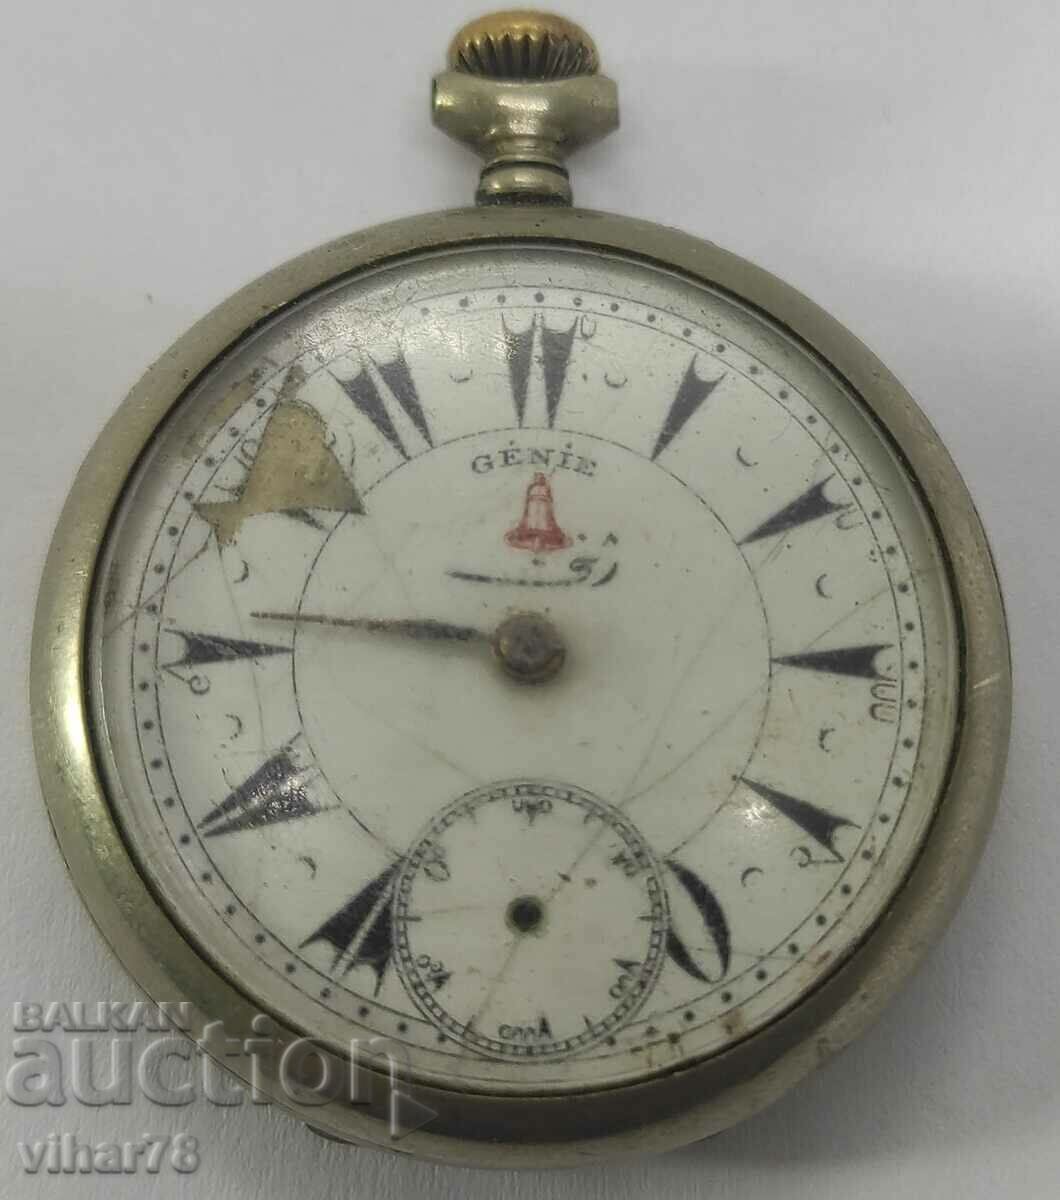 POCKET WATCH NOT WORKING FOR REPAIR